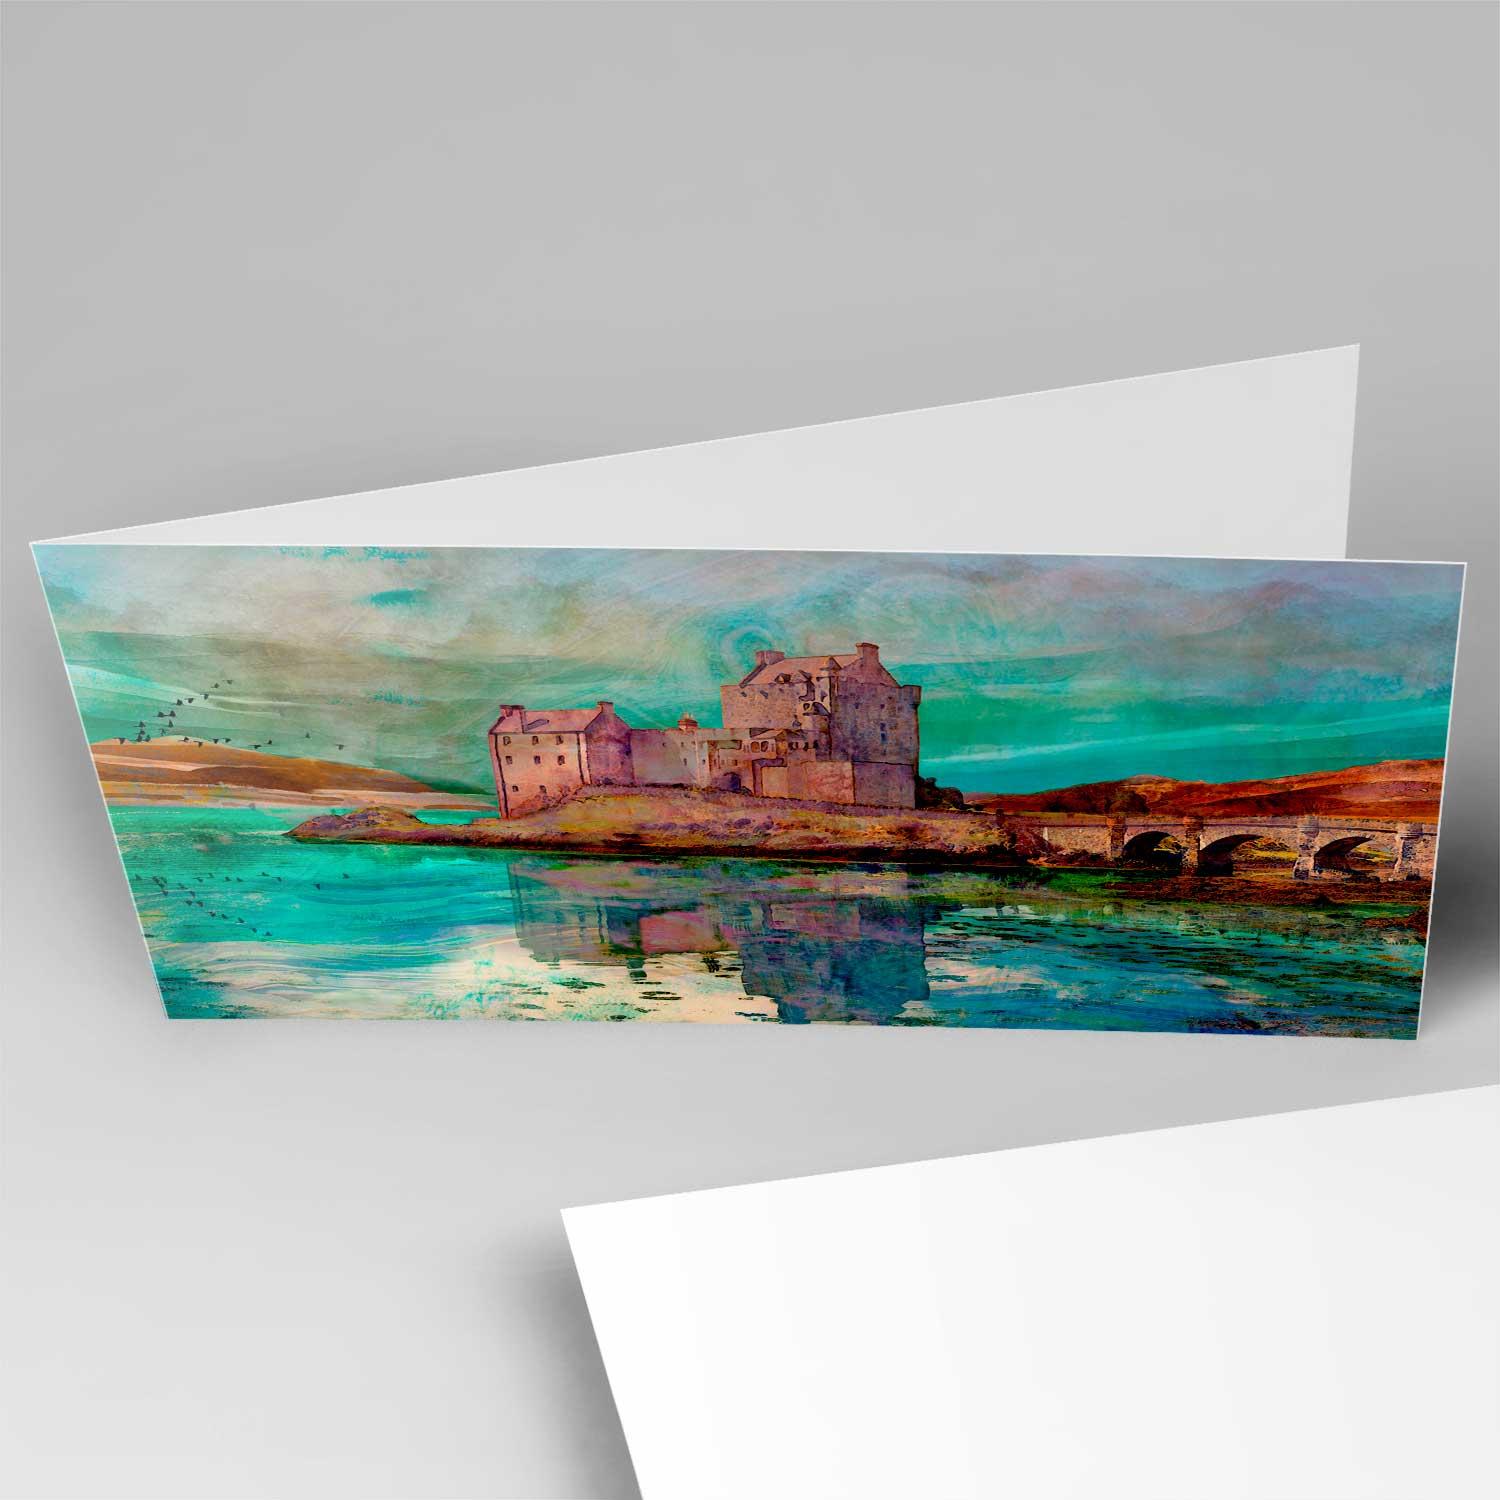 Eilean Donan Castle Greeting Card from an original painting by artist Lee Scammacca